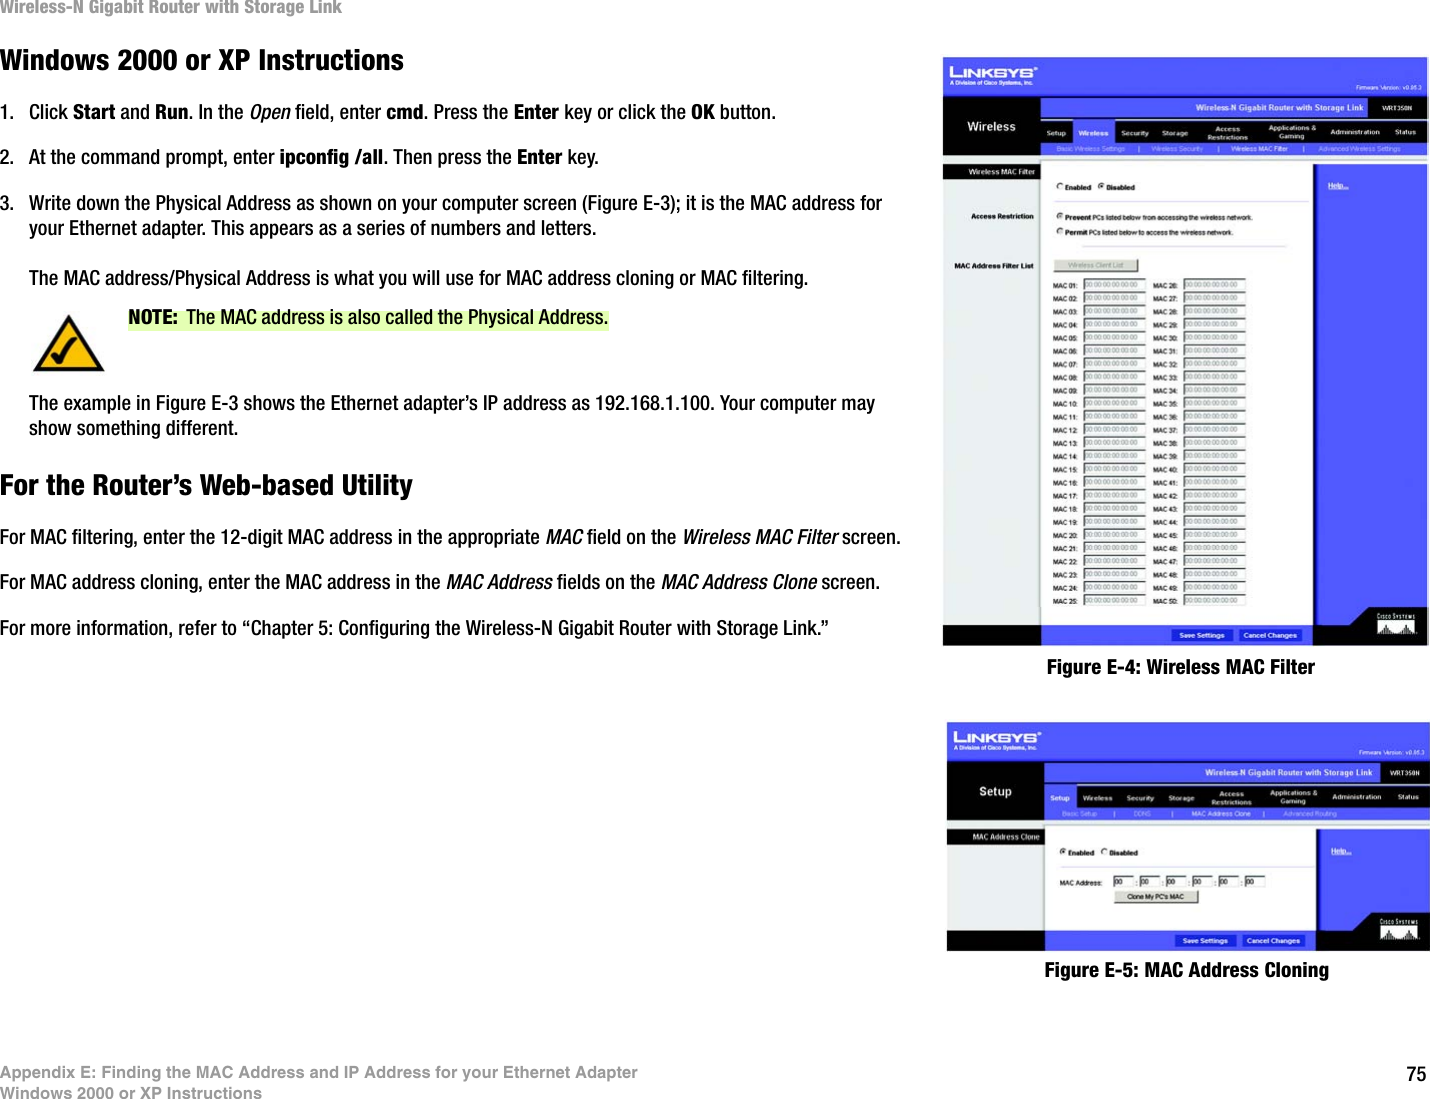 75Appendix E: Finding the MAC Address and IP Address for your Ethernet AdapterWindows 2000 or XP InstructionsWireless-N Gigabit Router with Storage LinkWindows 2000 or XP Instructions1. Click Start and Run. In the Open field, enter cmd. Press the Enter key or click the OK button.2. At the command prompt, enter ipconfig /all. Then press the Enter key.3. Write down the Physical Address as shown on your computer screen (Figure E-3); it is the MAC address for your Ethernet adapter. This appears as a series of numbers and letters.The MAC address/Physical Address is what you will use for MAC address cloning or MAC filtering.The example in Figure E-3 shows the Ethernet adapter’s IP address as 192.168.1.100. Your computer may show something different.For the Router’s Web-based UtilityFor MAC filtering, enter the 12-digit MAC address in the appropriate MAC field on the Wireless MAC Filter screen.For MAC address cloning, enter the MAC address in the MAC Address fields on the MAC Address Clone screen.For more information, refer to “Chapter 5: Configuring the Wireless-N Gigabit Router with Storage Link.”Figure E-4: Wireless MAC FilterNOTE: The MAC address is also called the Physical Address.Figure E-5: MAC Address Cloning